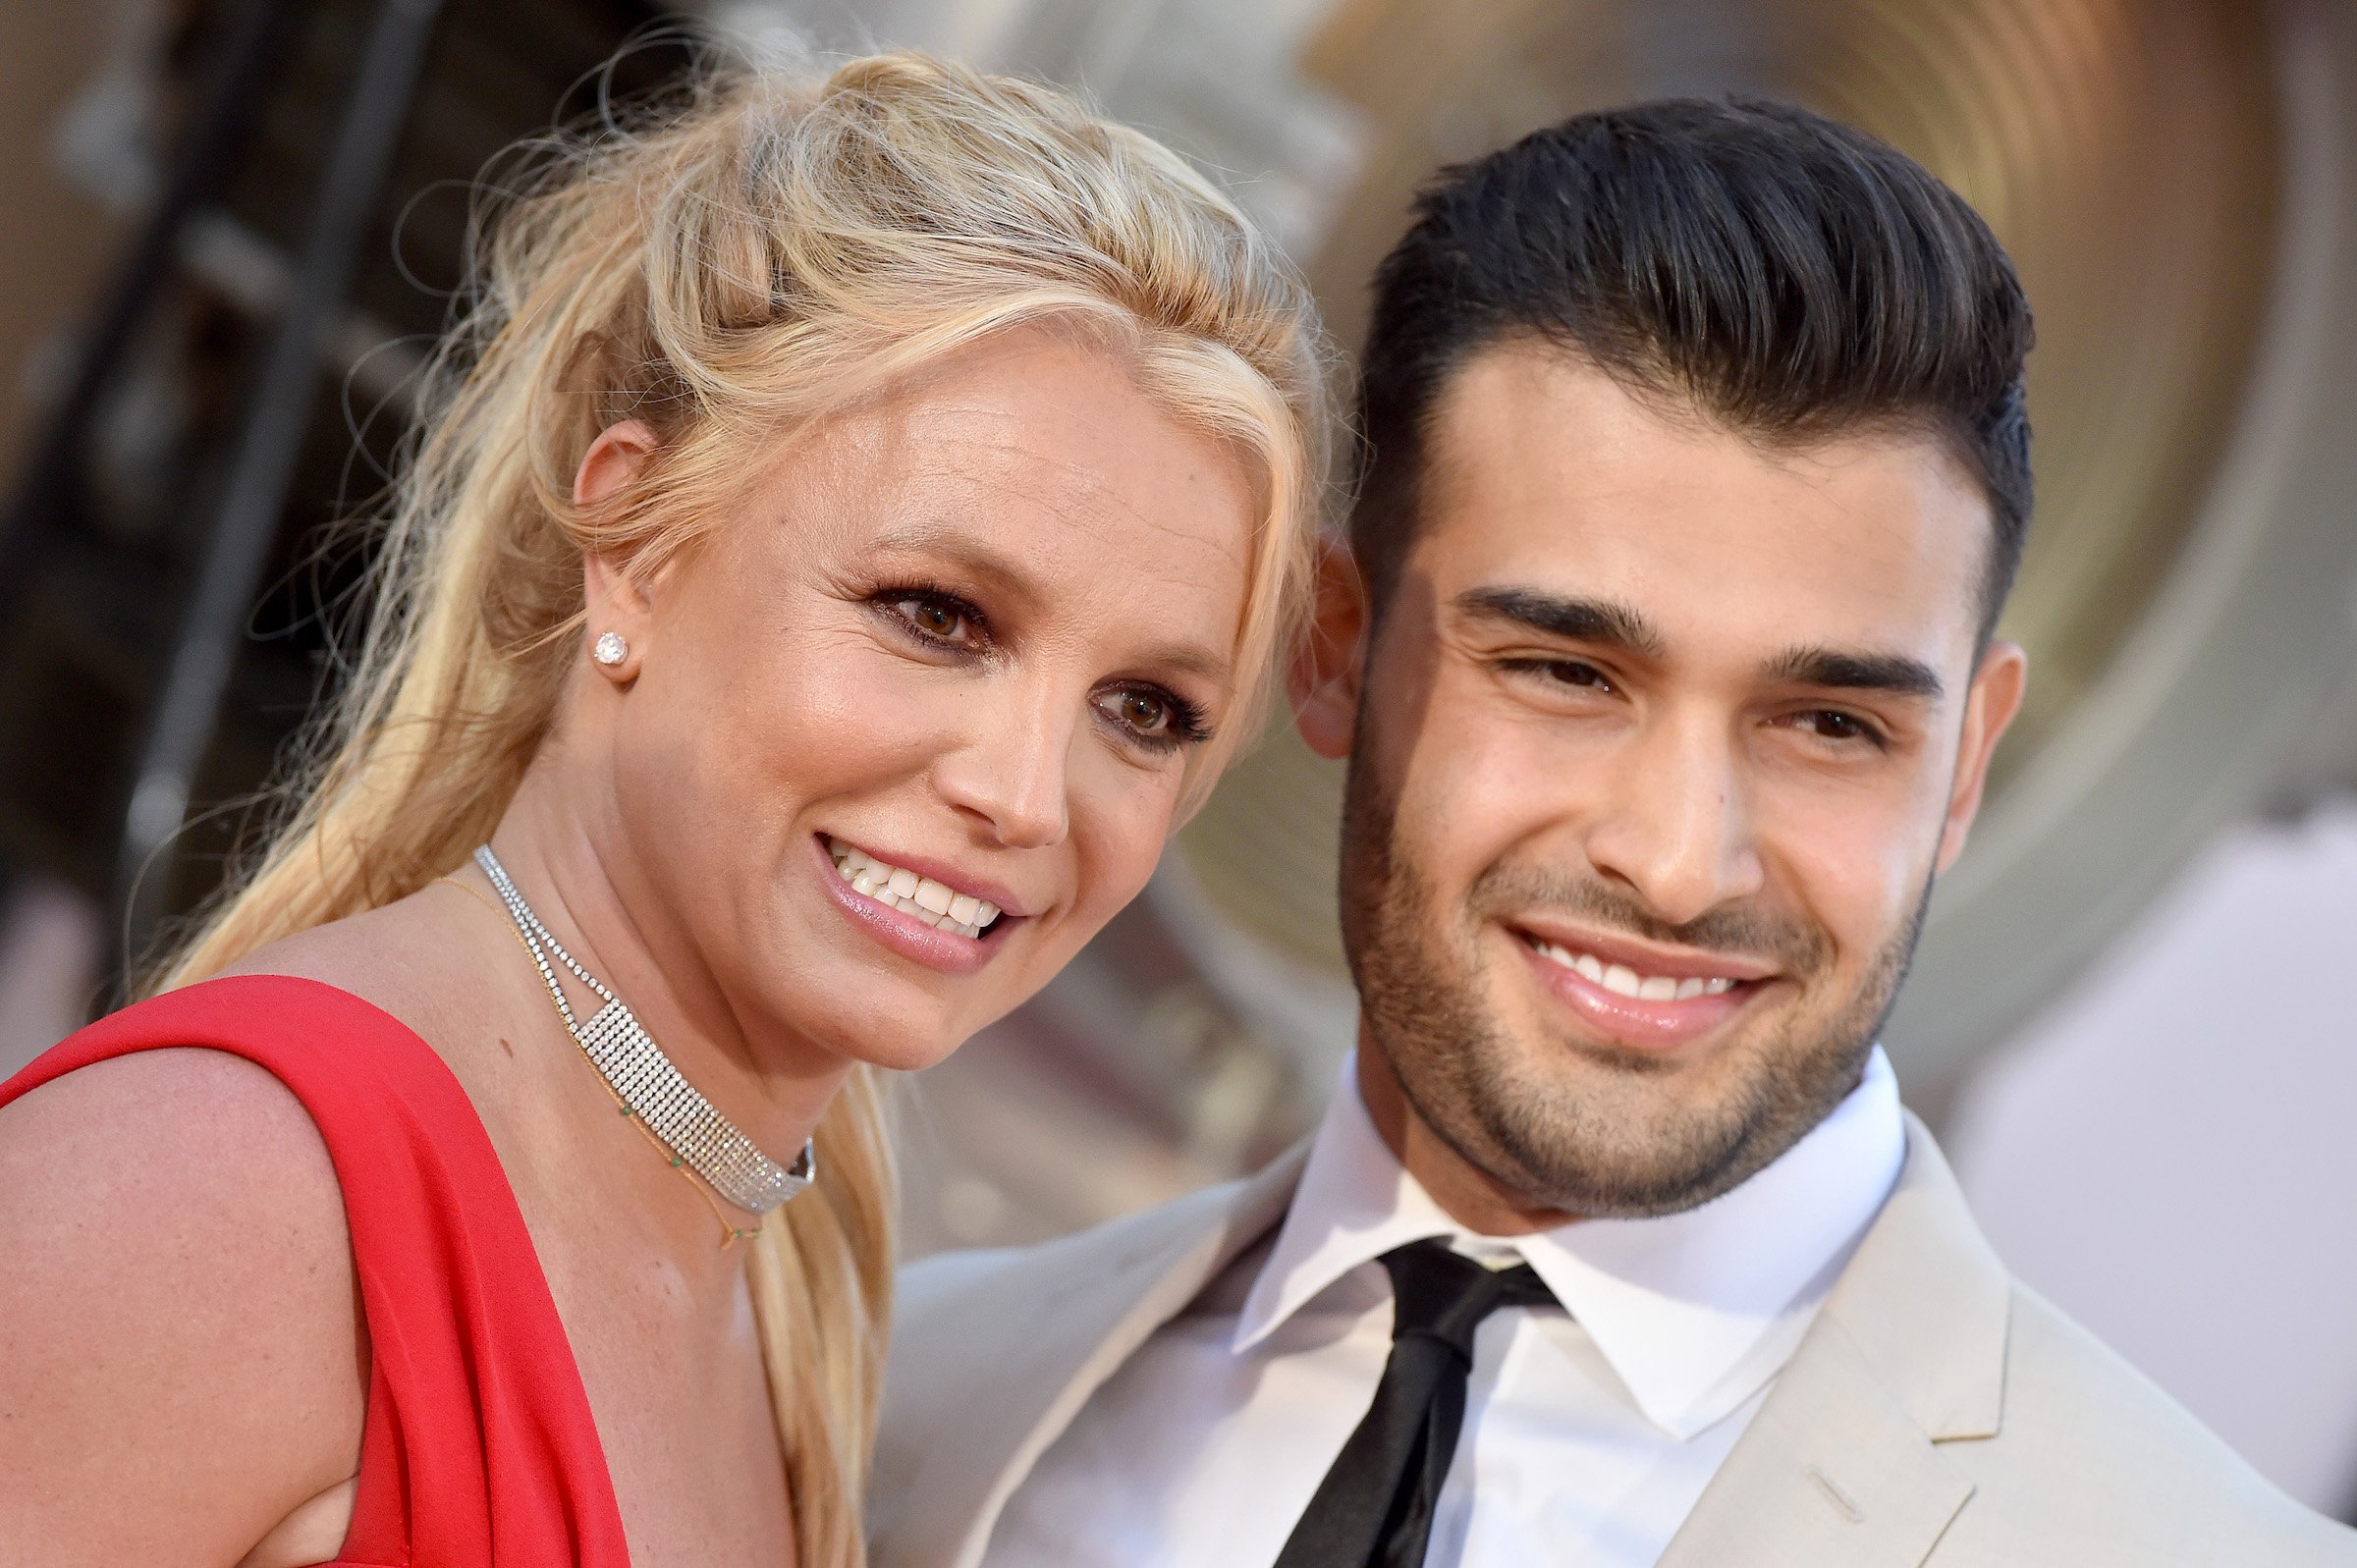 Britney Spears and Sam Asghari posing together and smiling